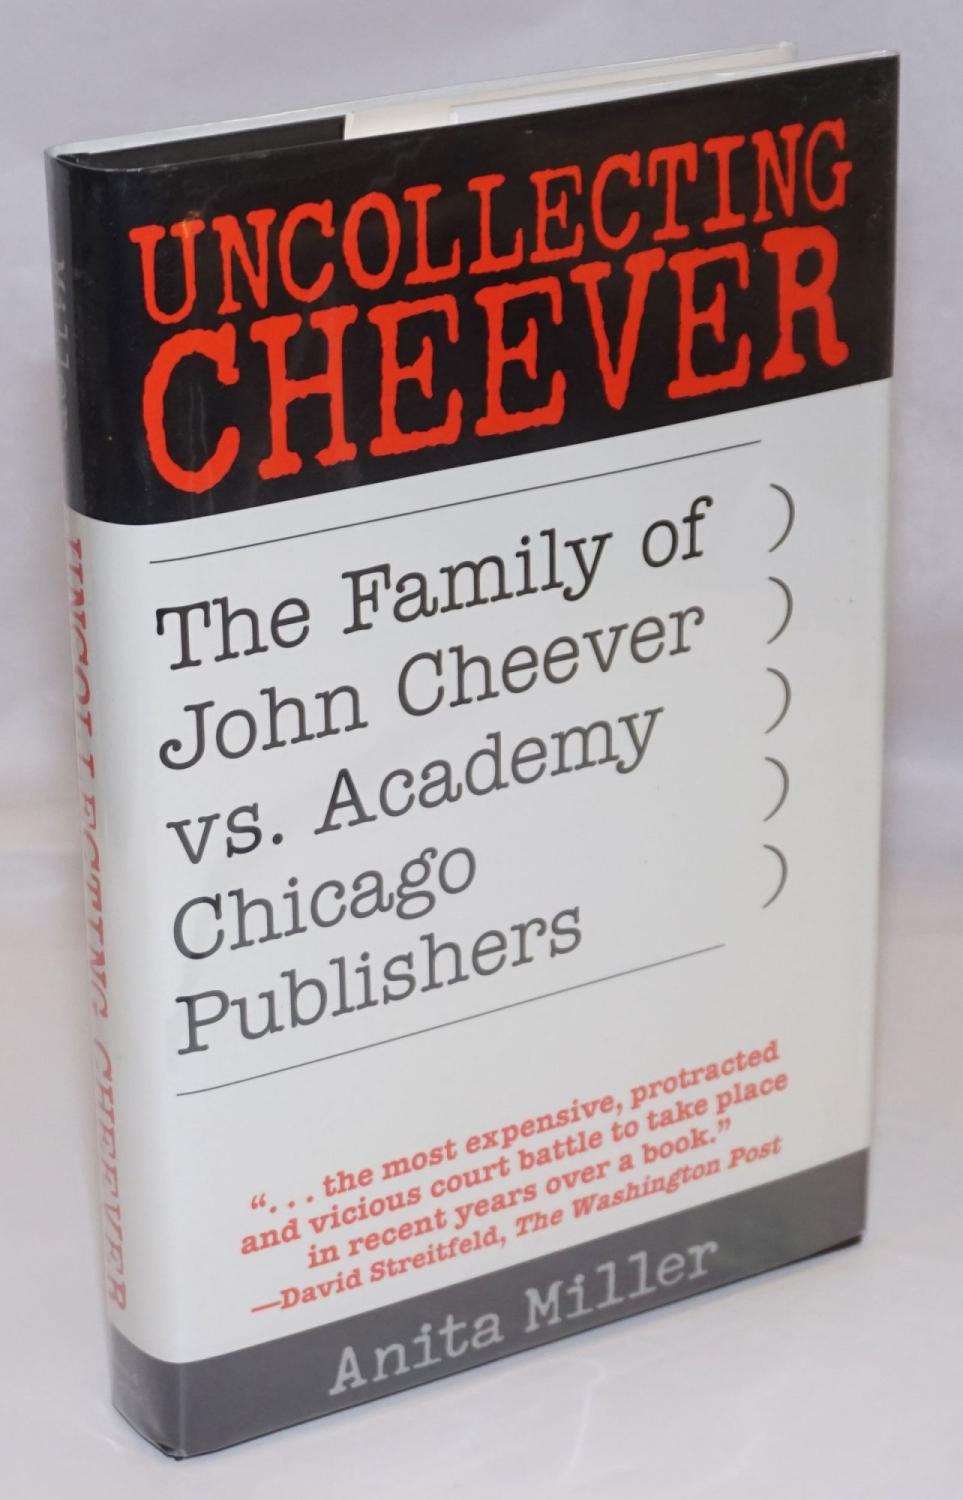 Uncollecting Cheever: the family of John Cheever vs. Academy Chicago Publishers - Cheever, John] Anita Miller